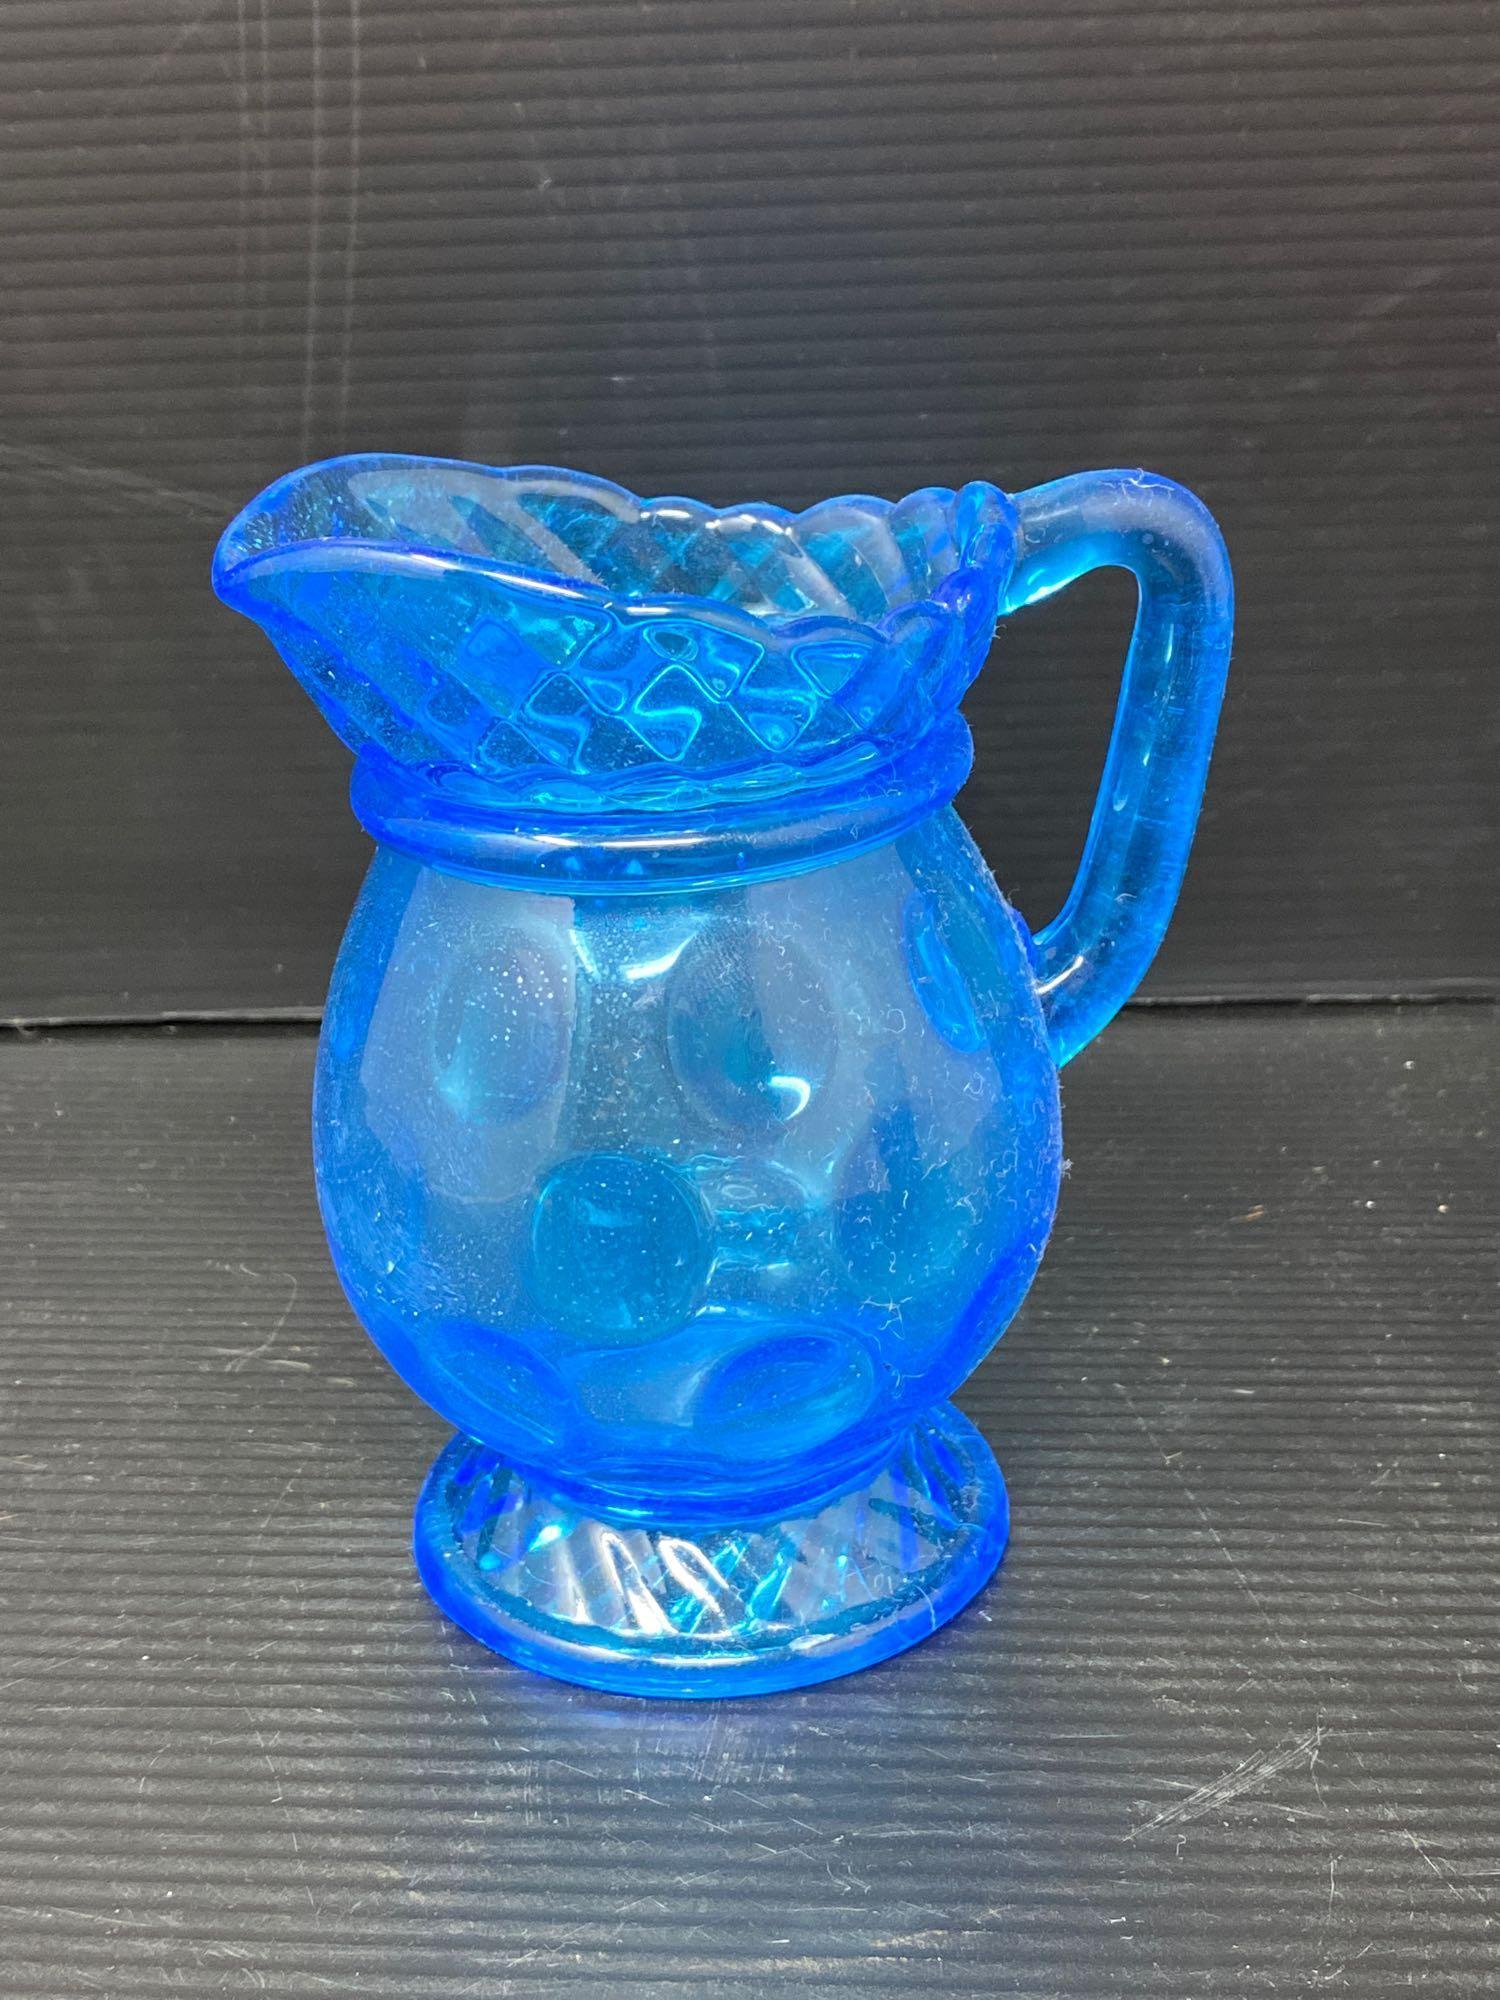 Blue Glass Lot- Includes Bottles, Vase and Creamers- One is Shirley Temple